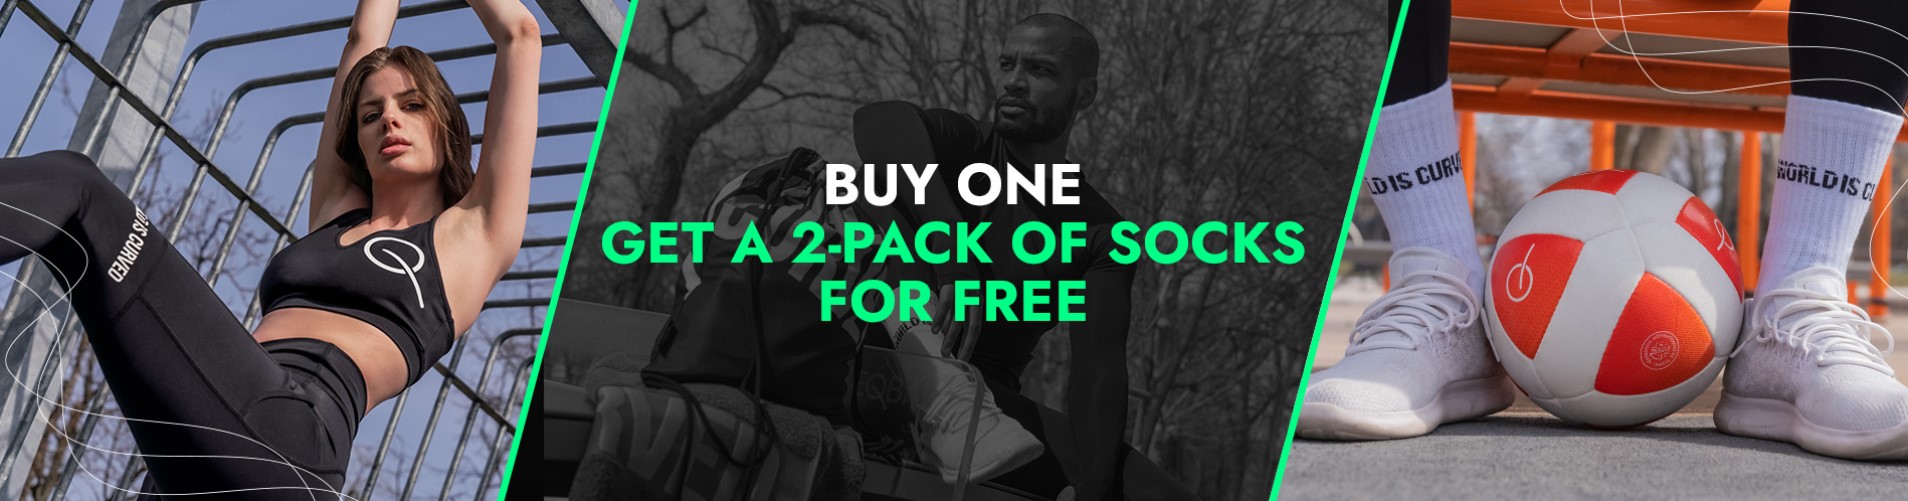 Buy one get a 2-pack of socks for free promotion at Teq Shop!